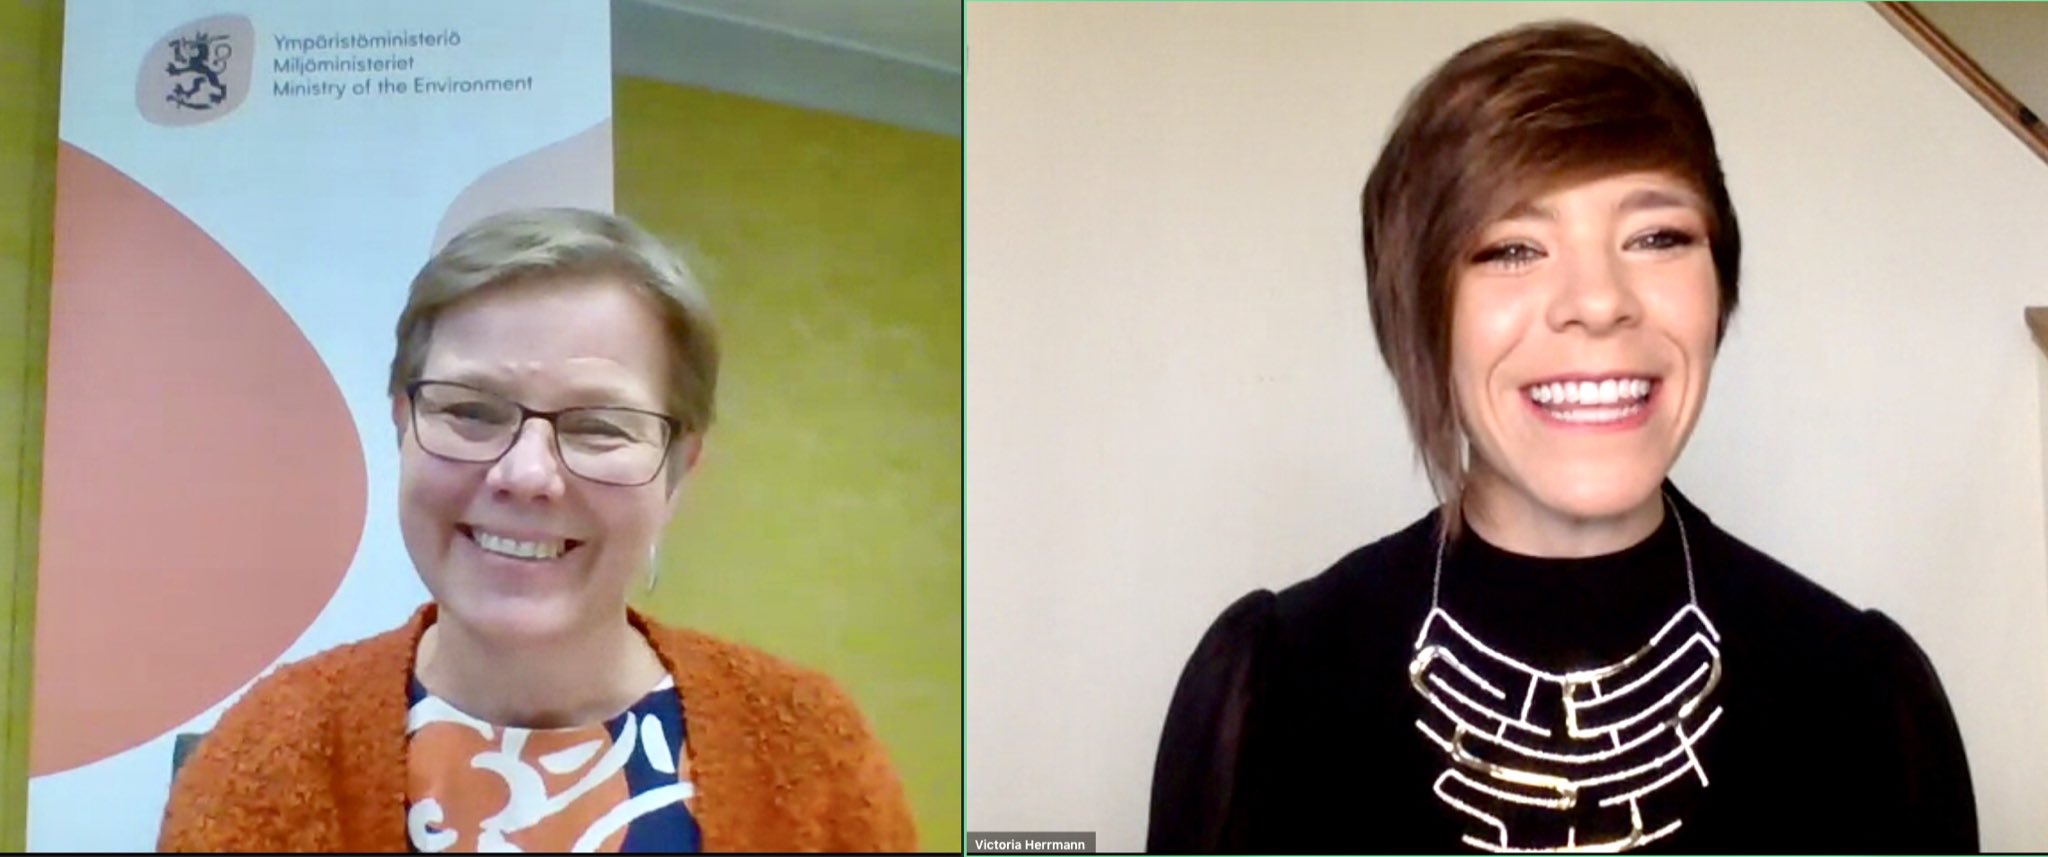 Screen grab of the webinar featuring Minister Mikkonen and the moderator Victoria Herrman. 